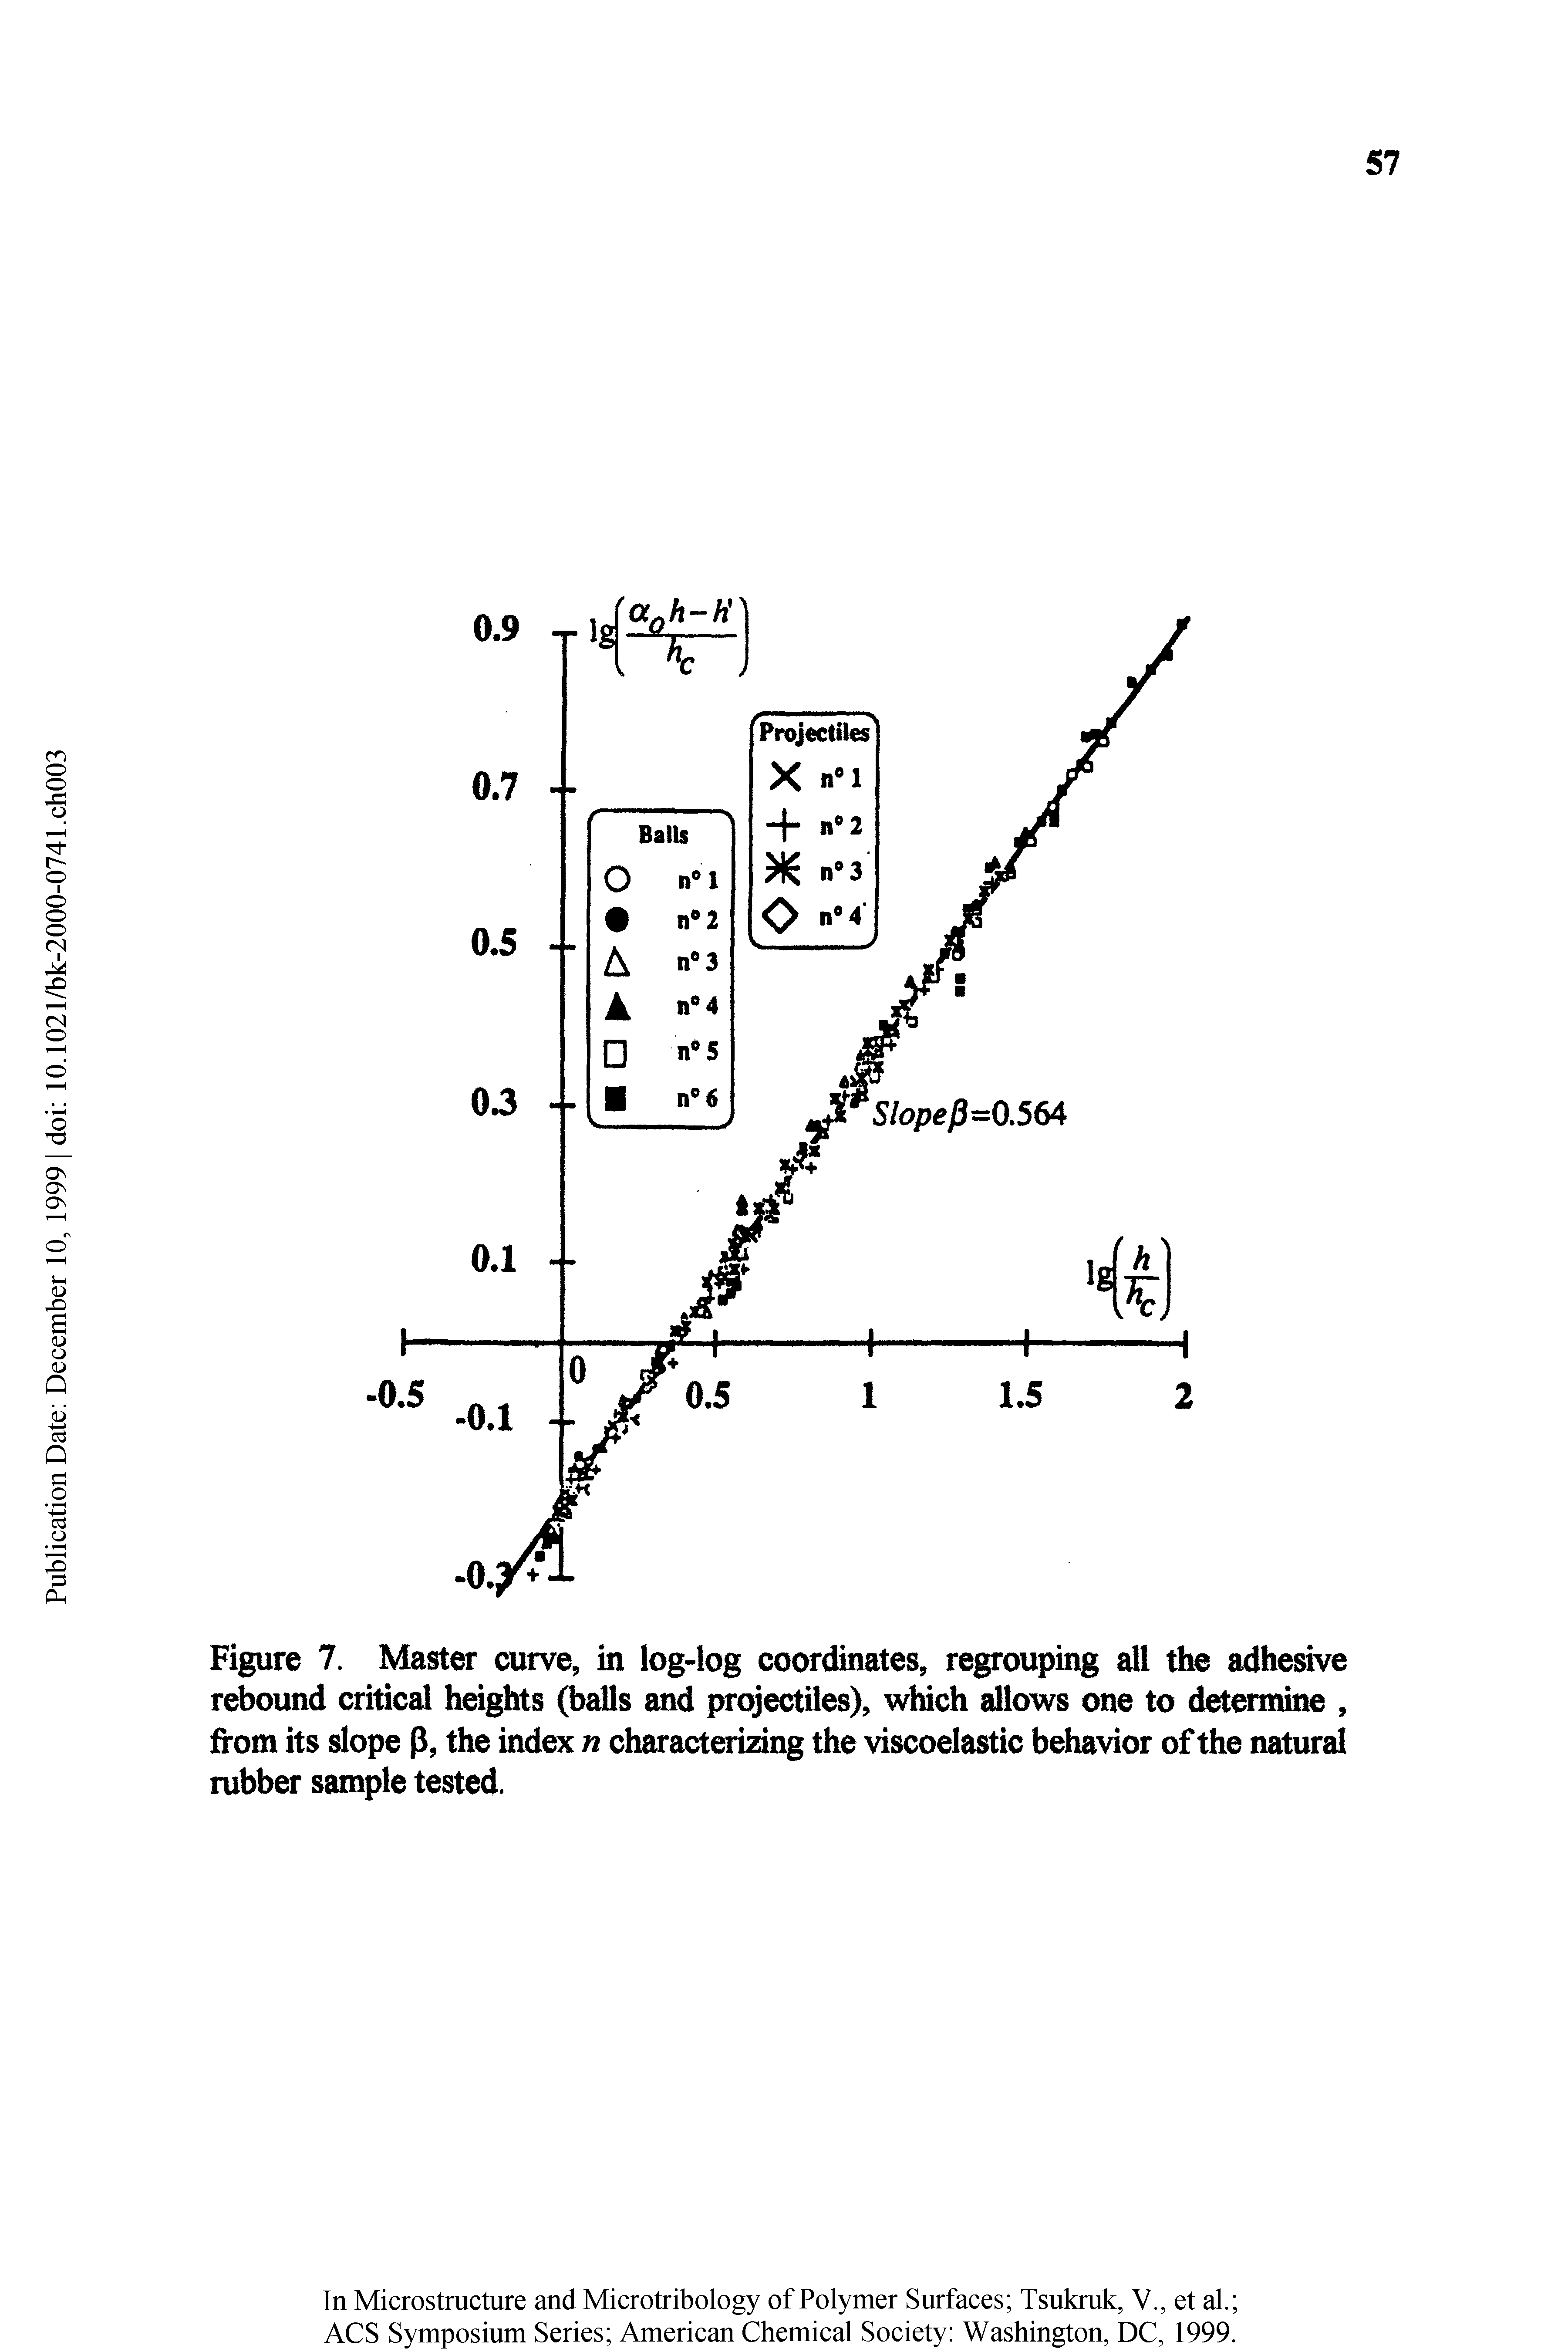 Figure 7. Master curve, in log-log coordinates, regrouping all tfie adhesive rebound critical heights (balls and projectiles), which allows one to determine, firom its slope P, the index n characterizing the viscoelastic behavior of the natural rubber sample tested.